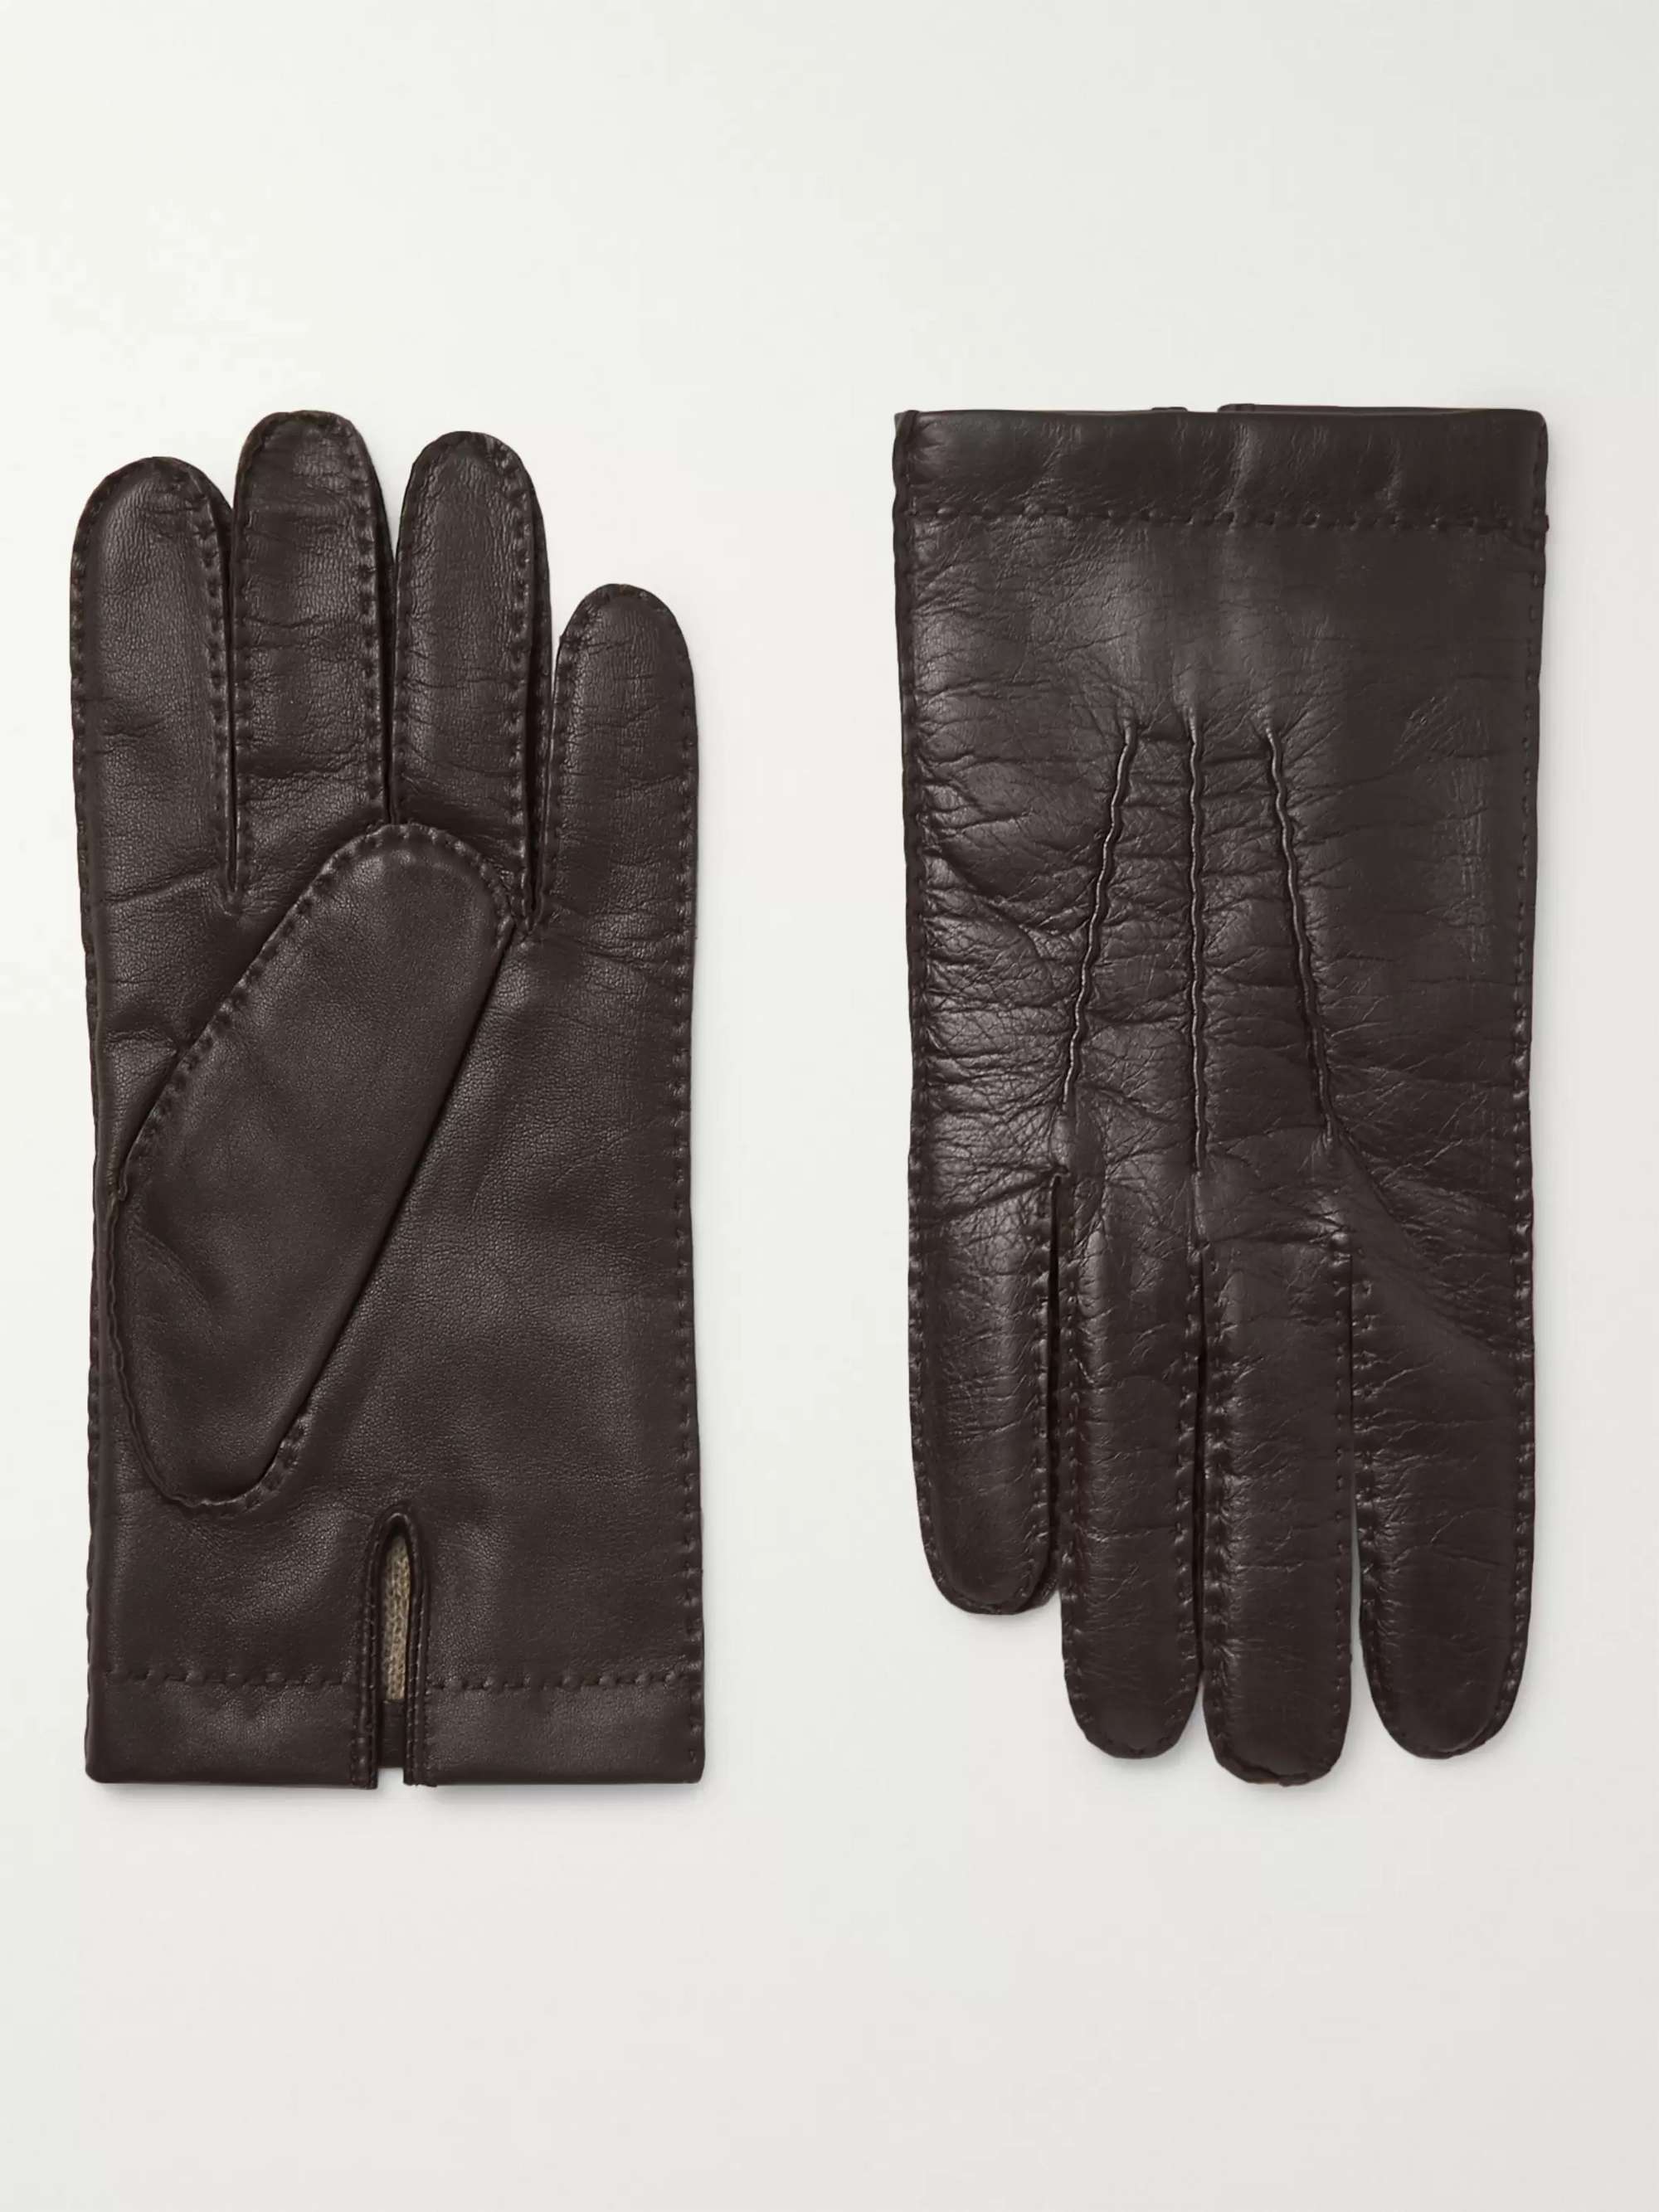 DENTS Shaftesbury Touchscreen Cashmere-Lined Leather Gloves